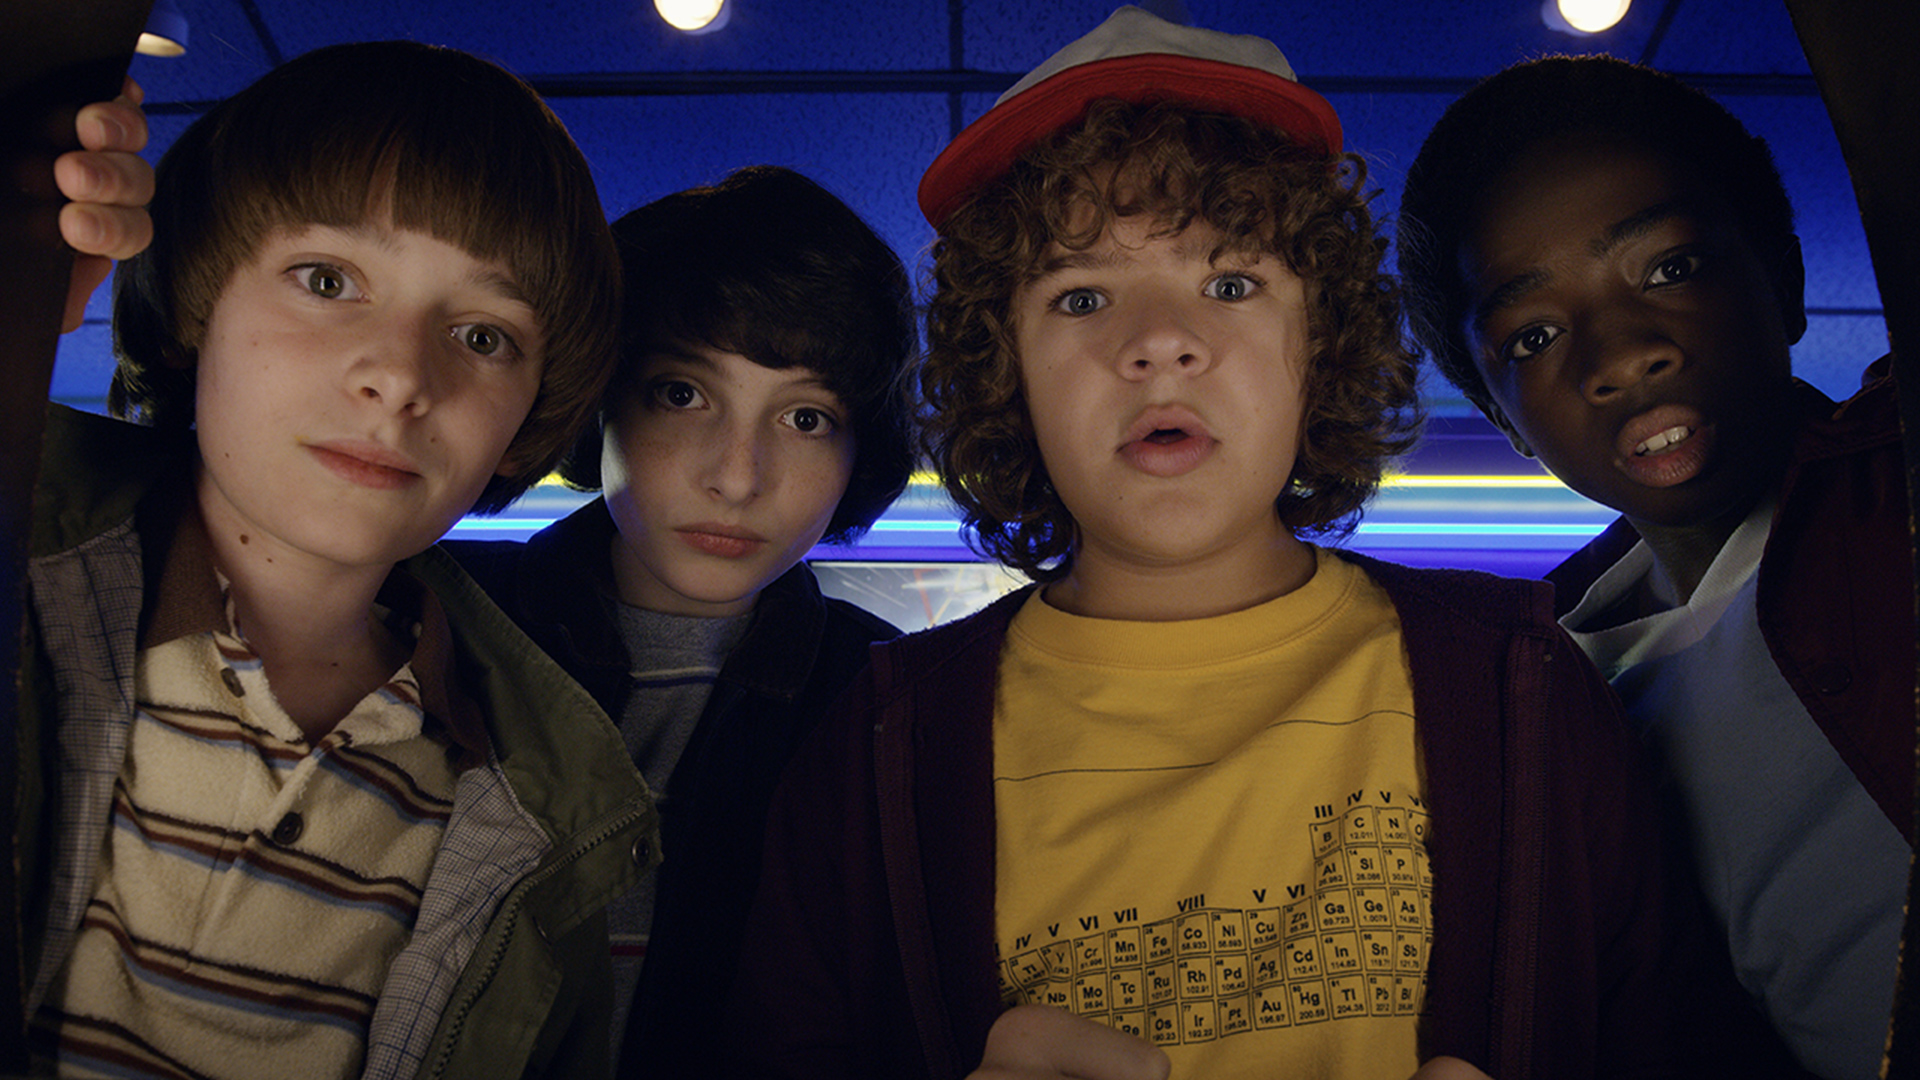 Will, Mike, Dustin and Lucas from Stranger Things